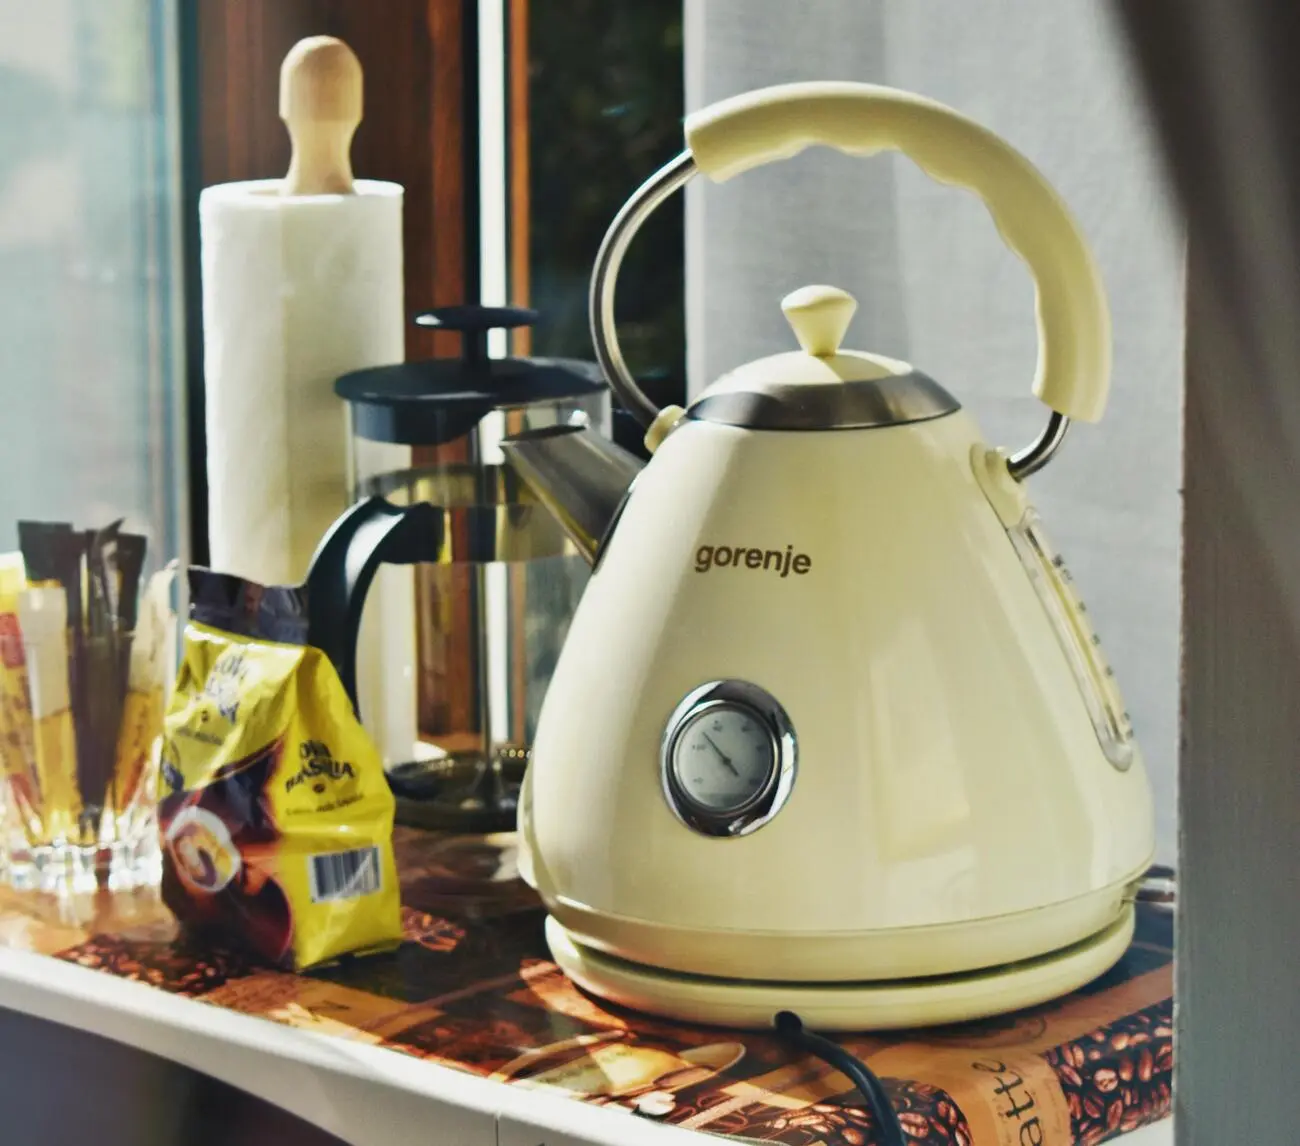 How Does an Electric Kettle Work